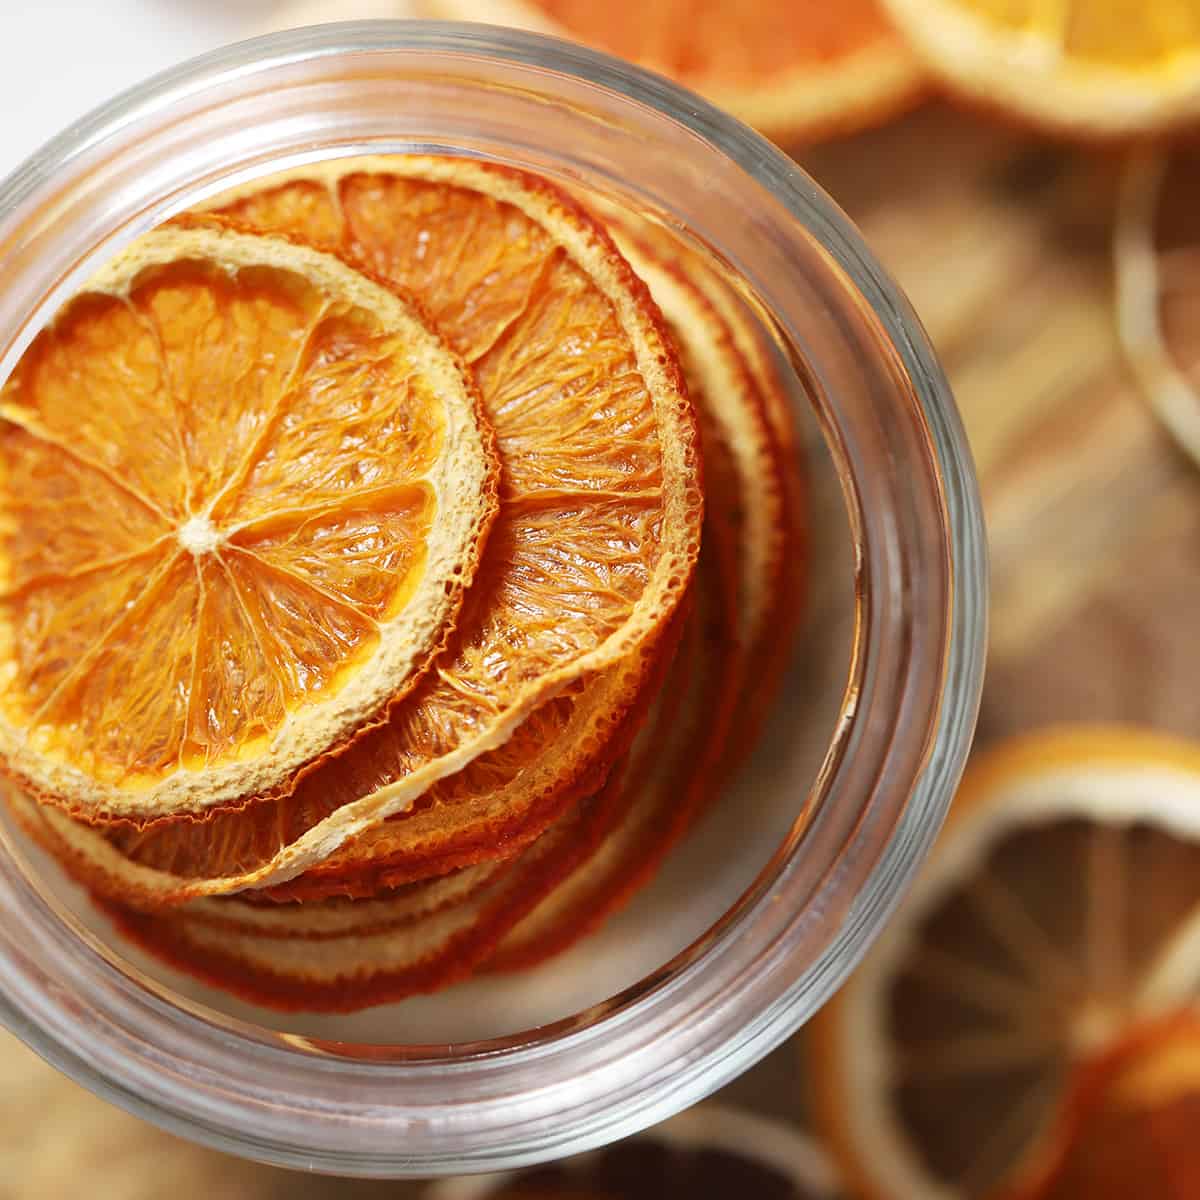 How to Make Dehydrated Orange Slices in the Oven - Mitten Girl